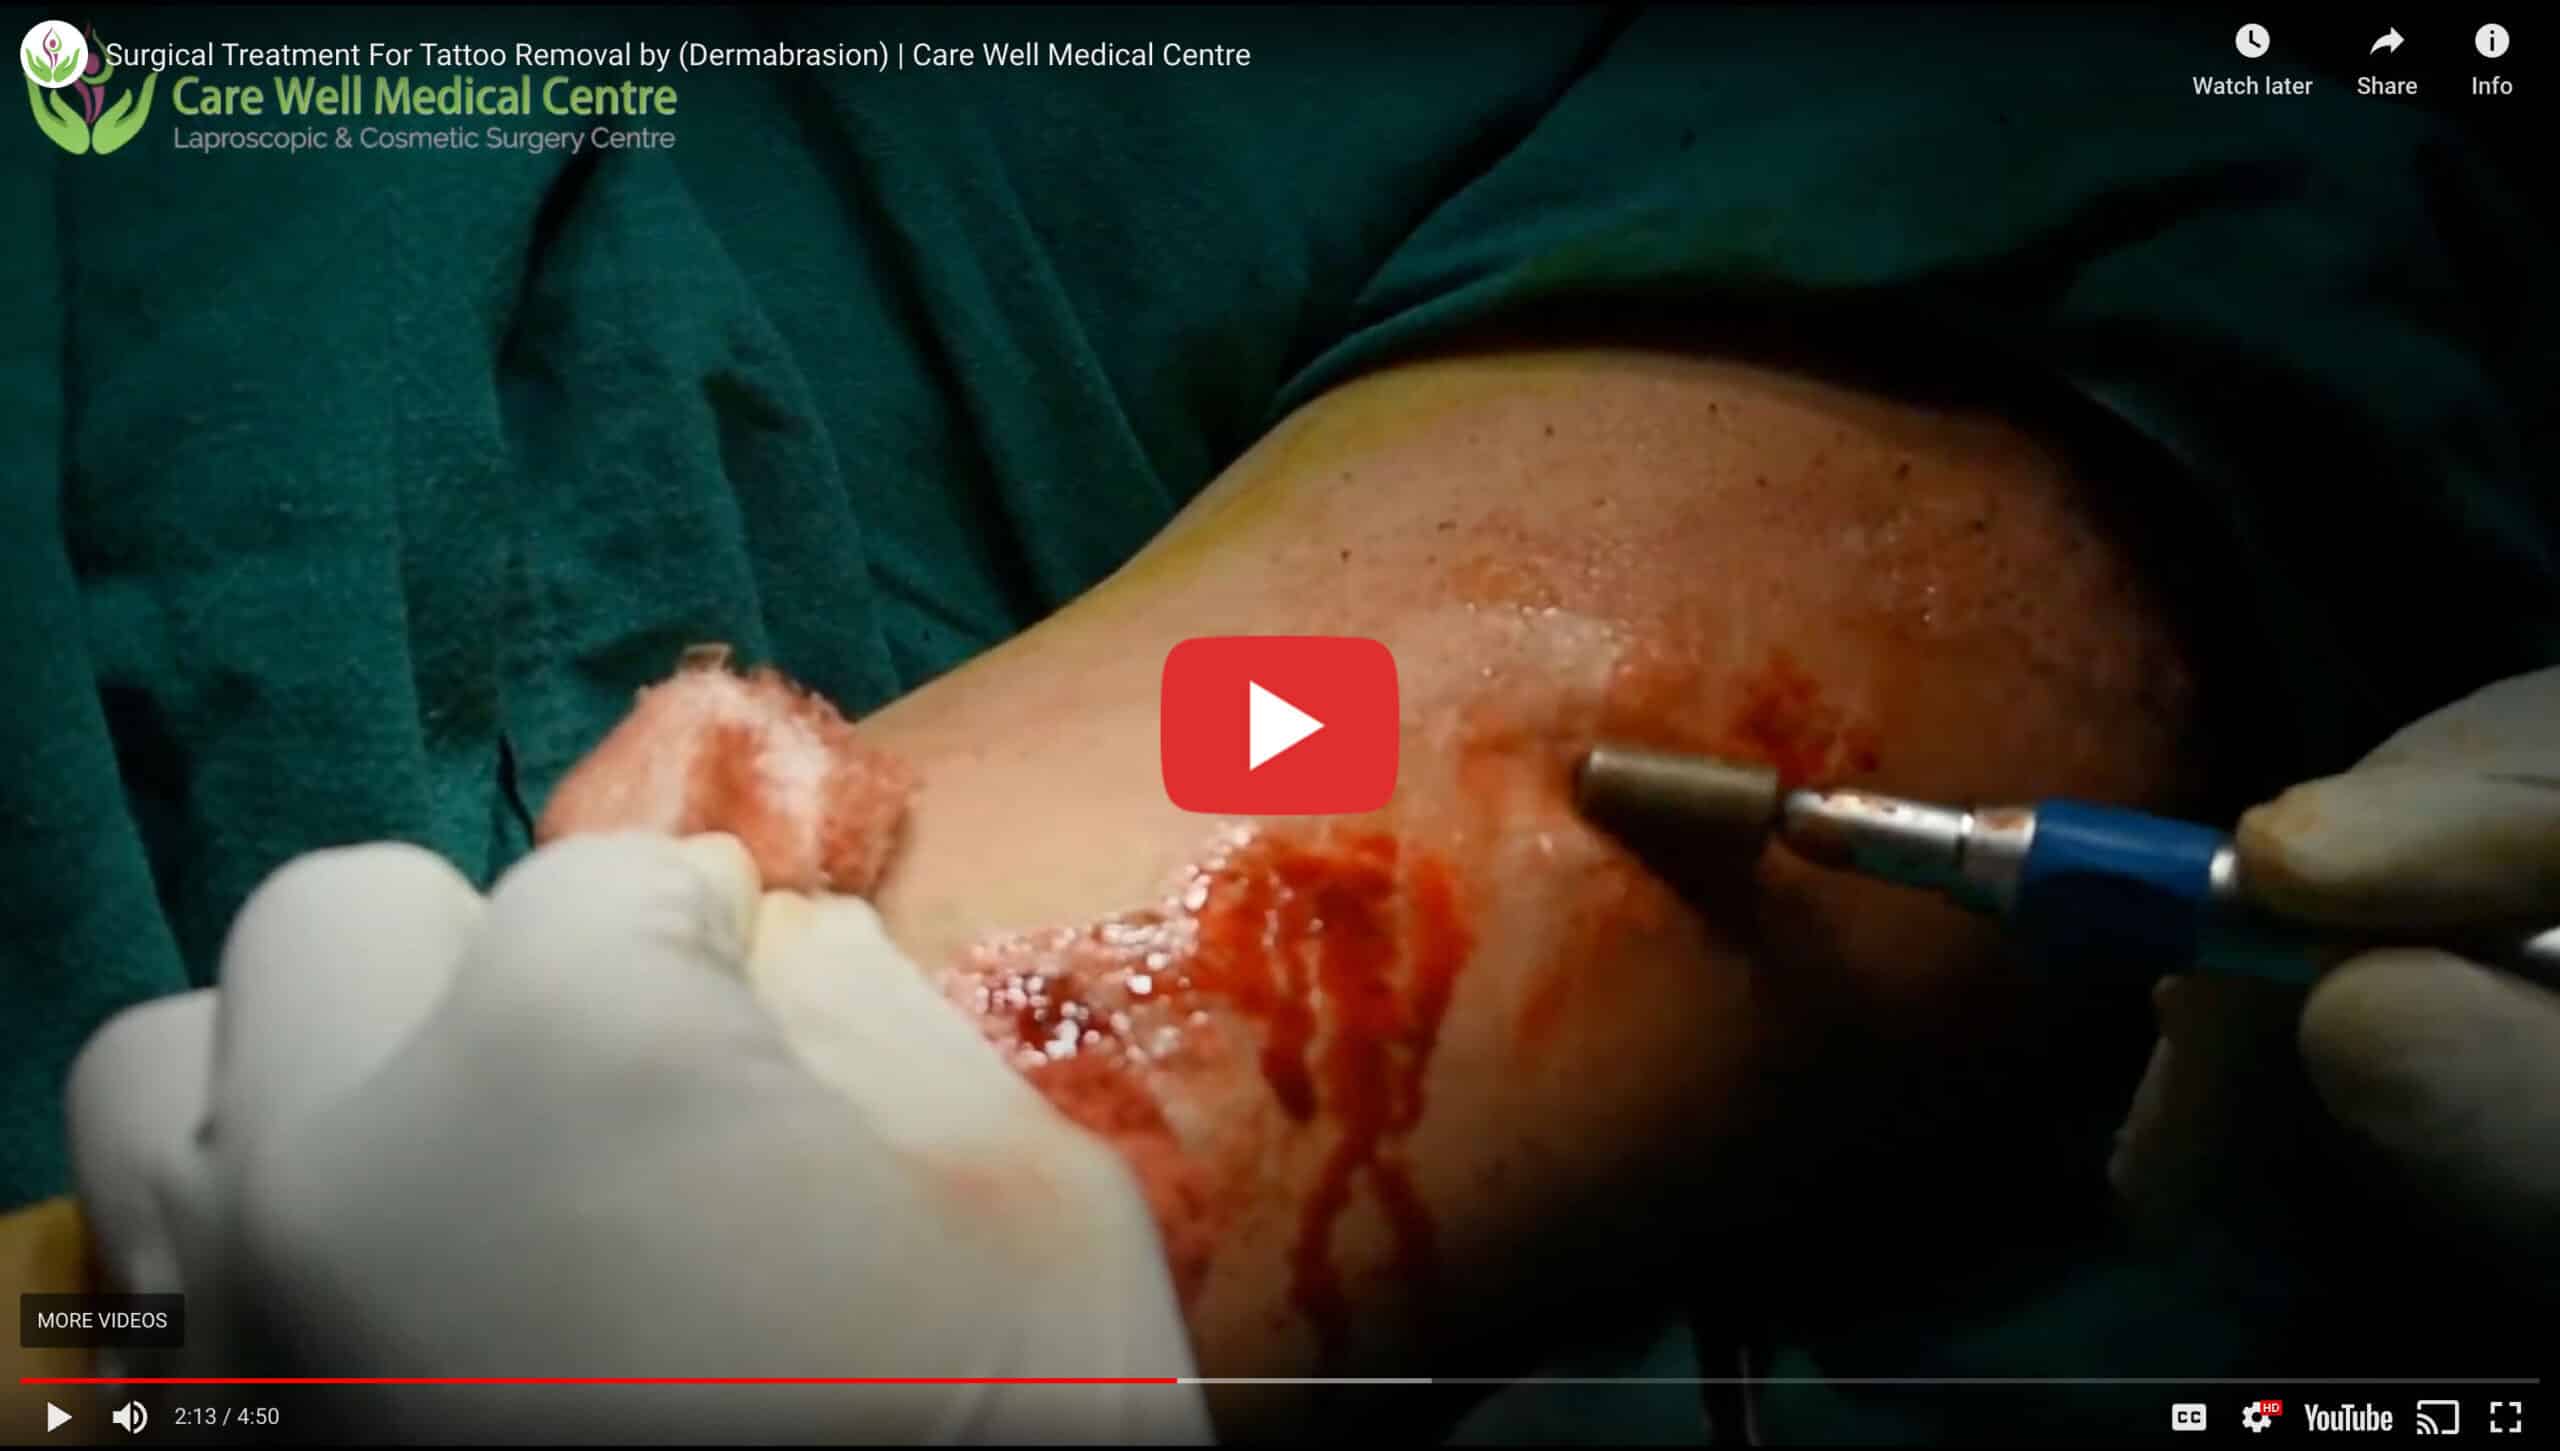 Watch a Dermabrasion Tattoo Removal Procedure